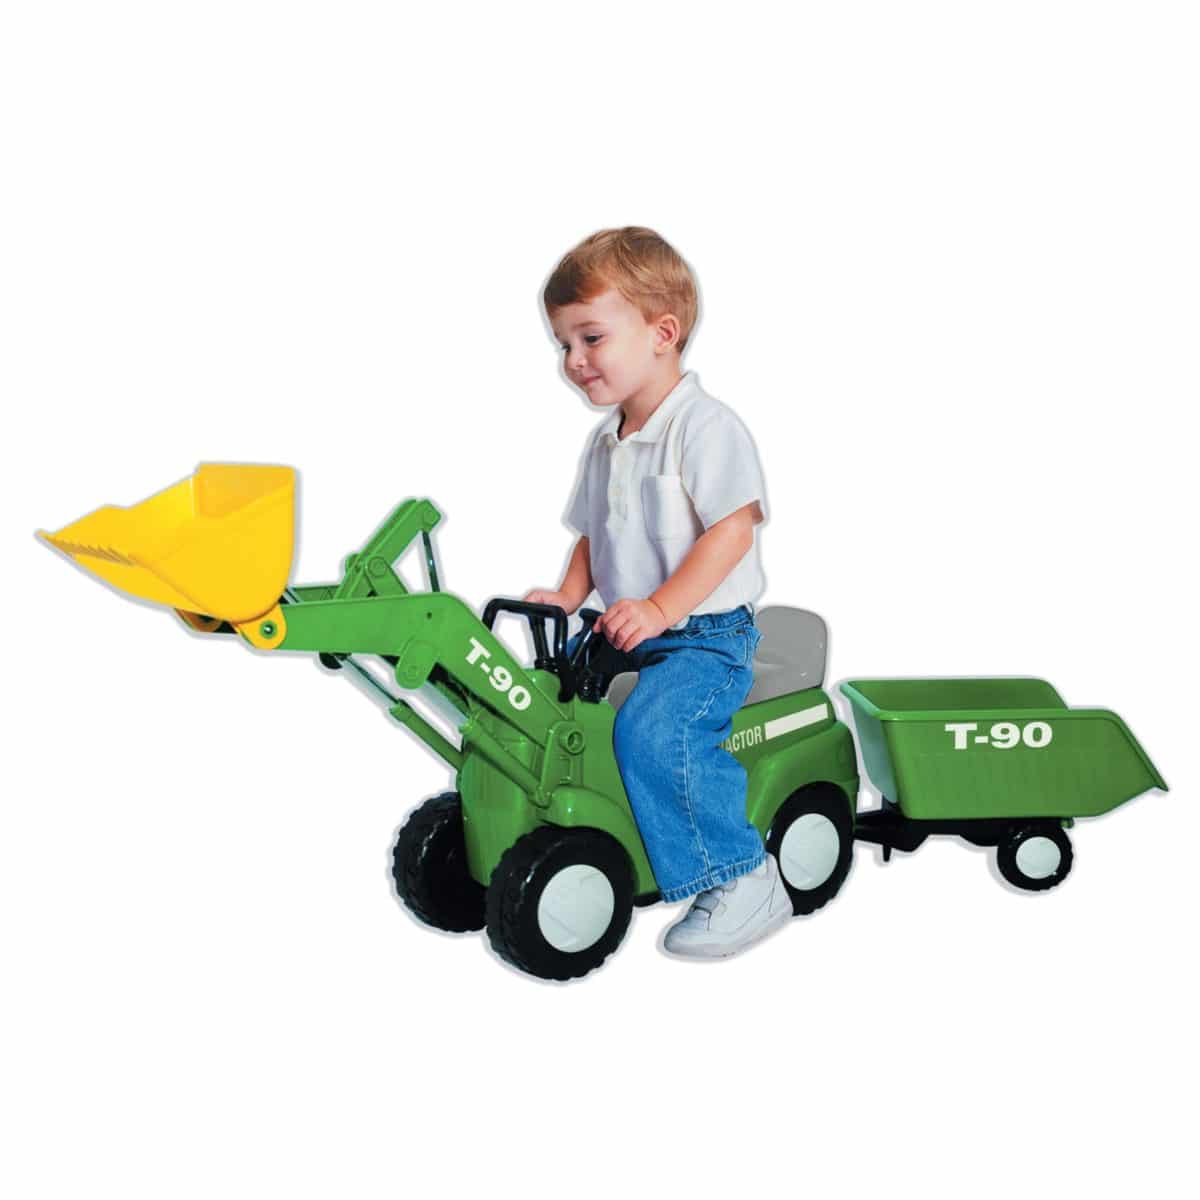 Best Gifts For Kids Excavator Peddal Ride Along Toy